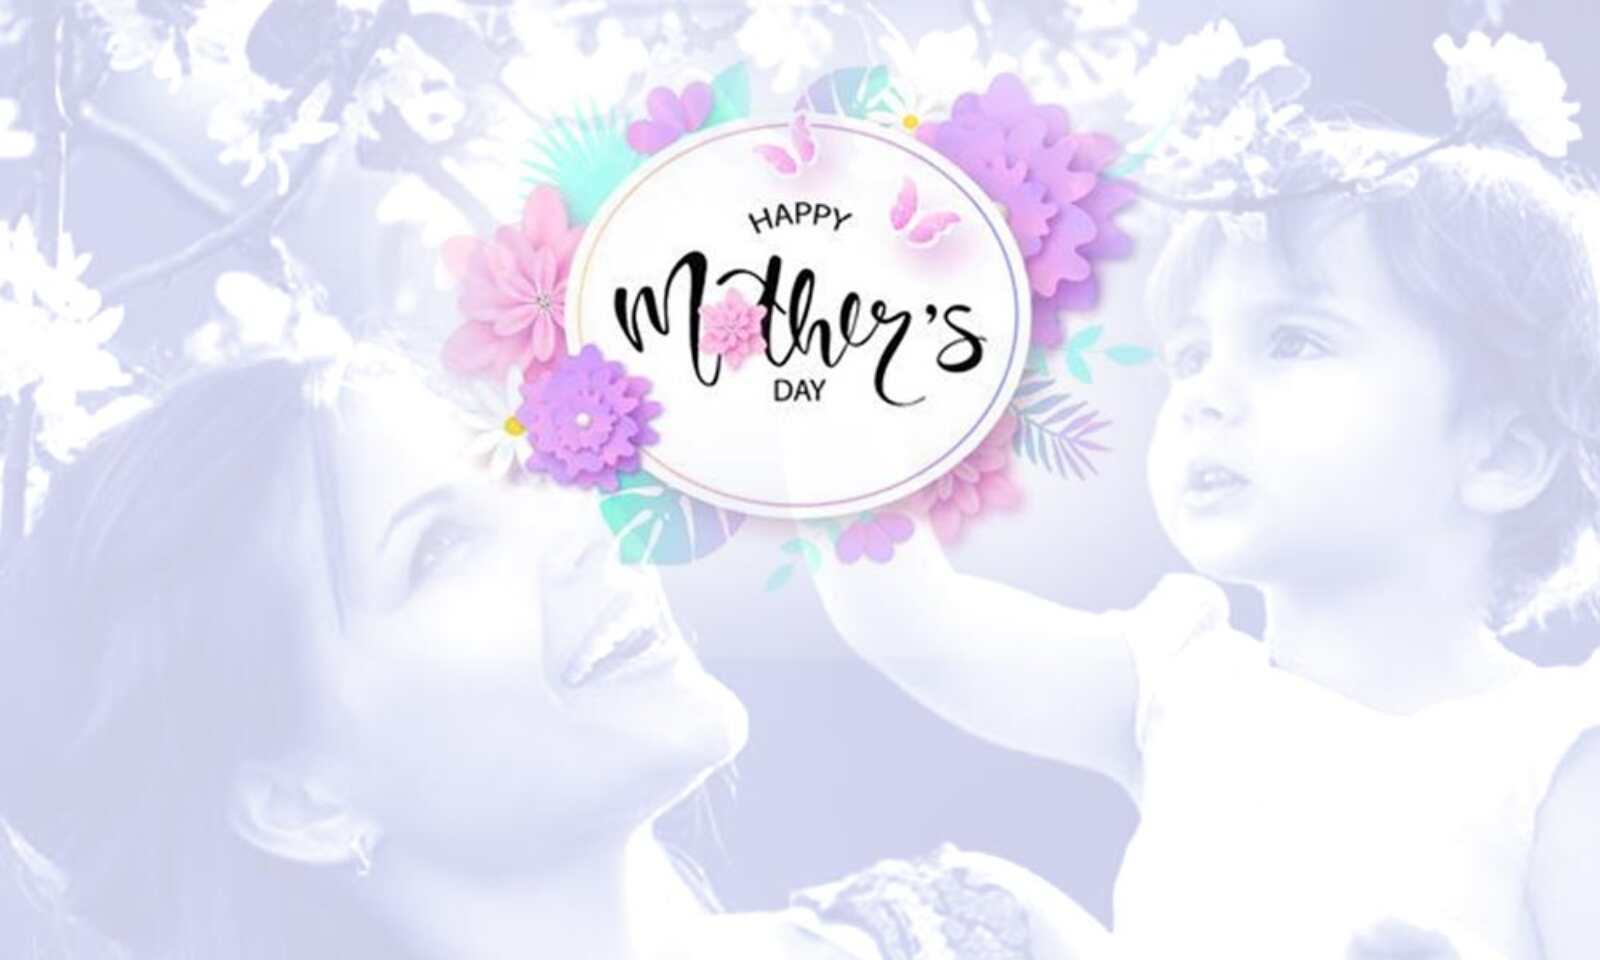 How To Wish Happy Mothers Day In Your Mother Tongue Mother S Day Greetings In Different Languages